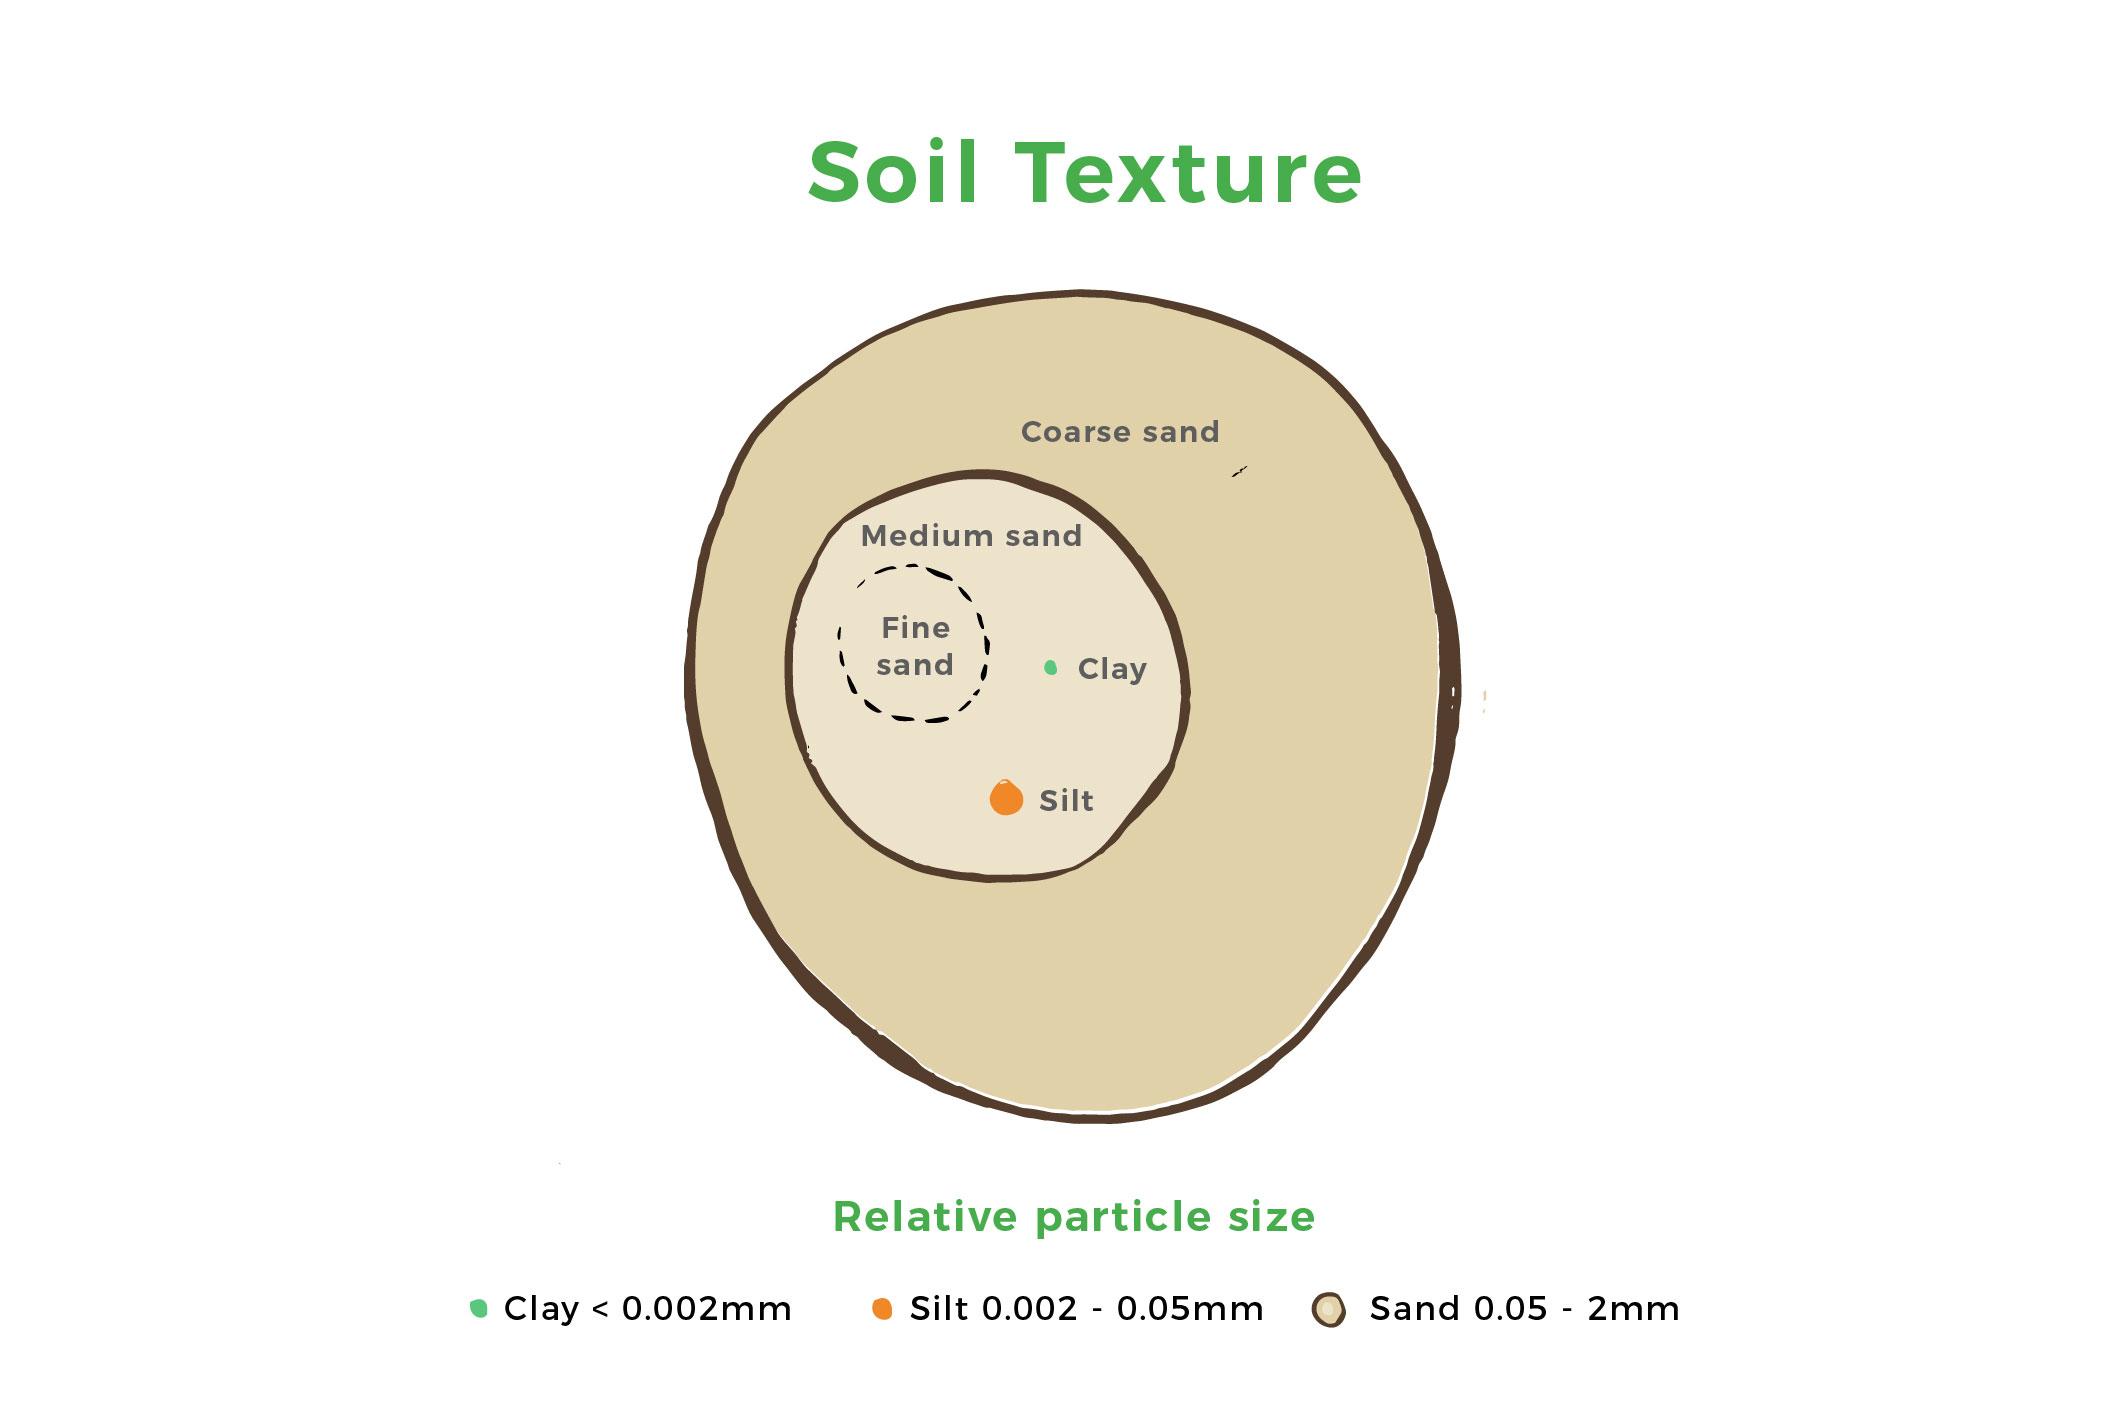 Soil texture relates to the mixture of three particle types - sand, silt and clay. GrowingObservatory.org